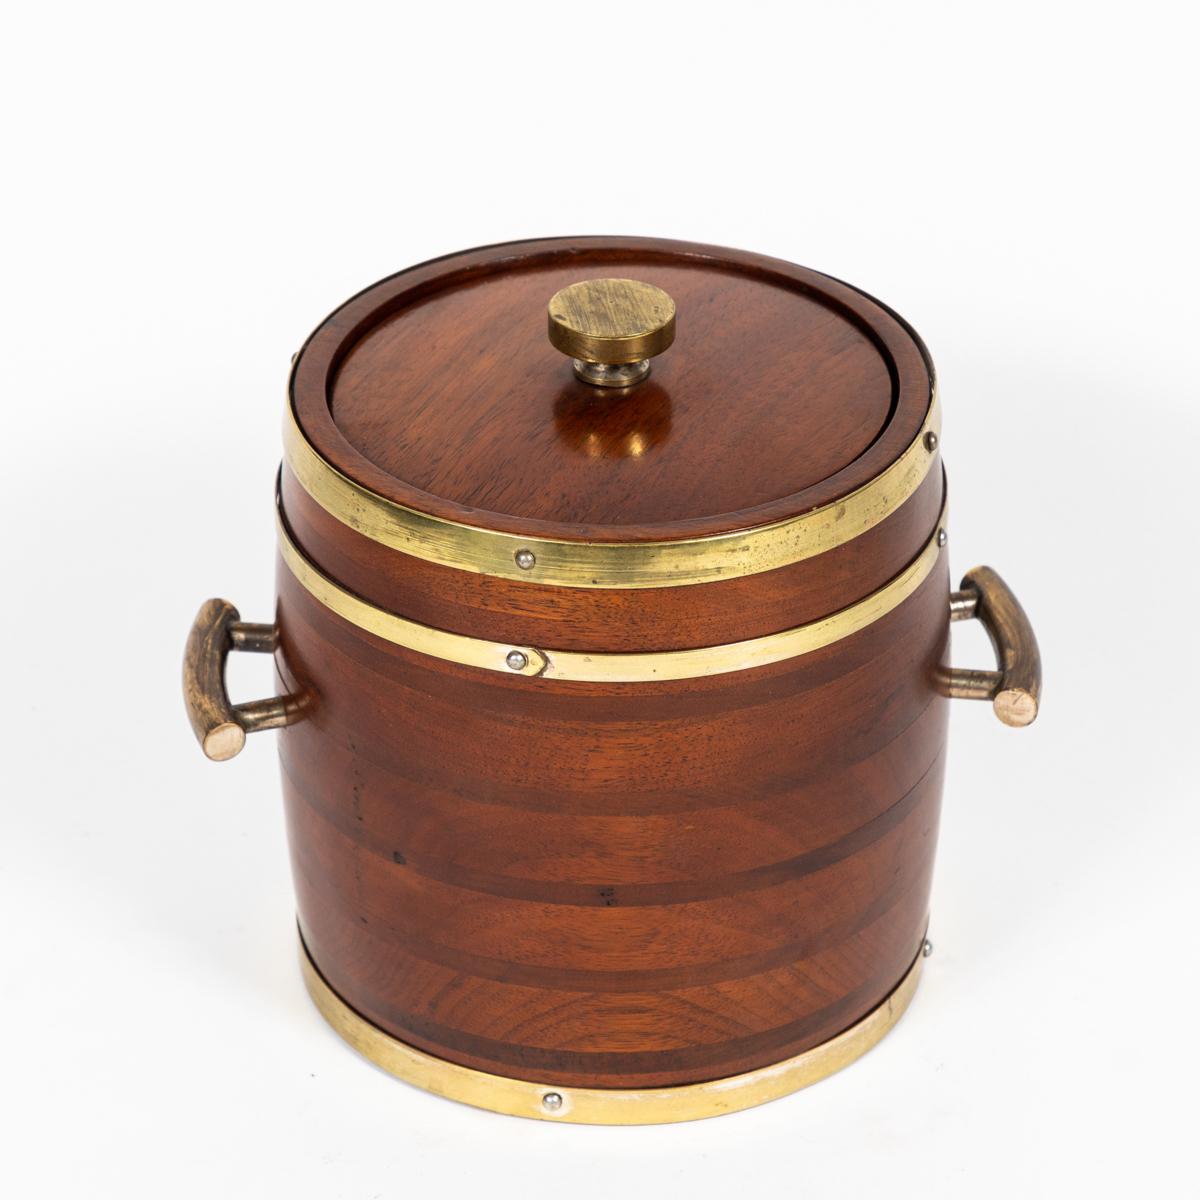 Art Deco Wooden Ice Bucket with Brass Fittings from England, circa 1920